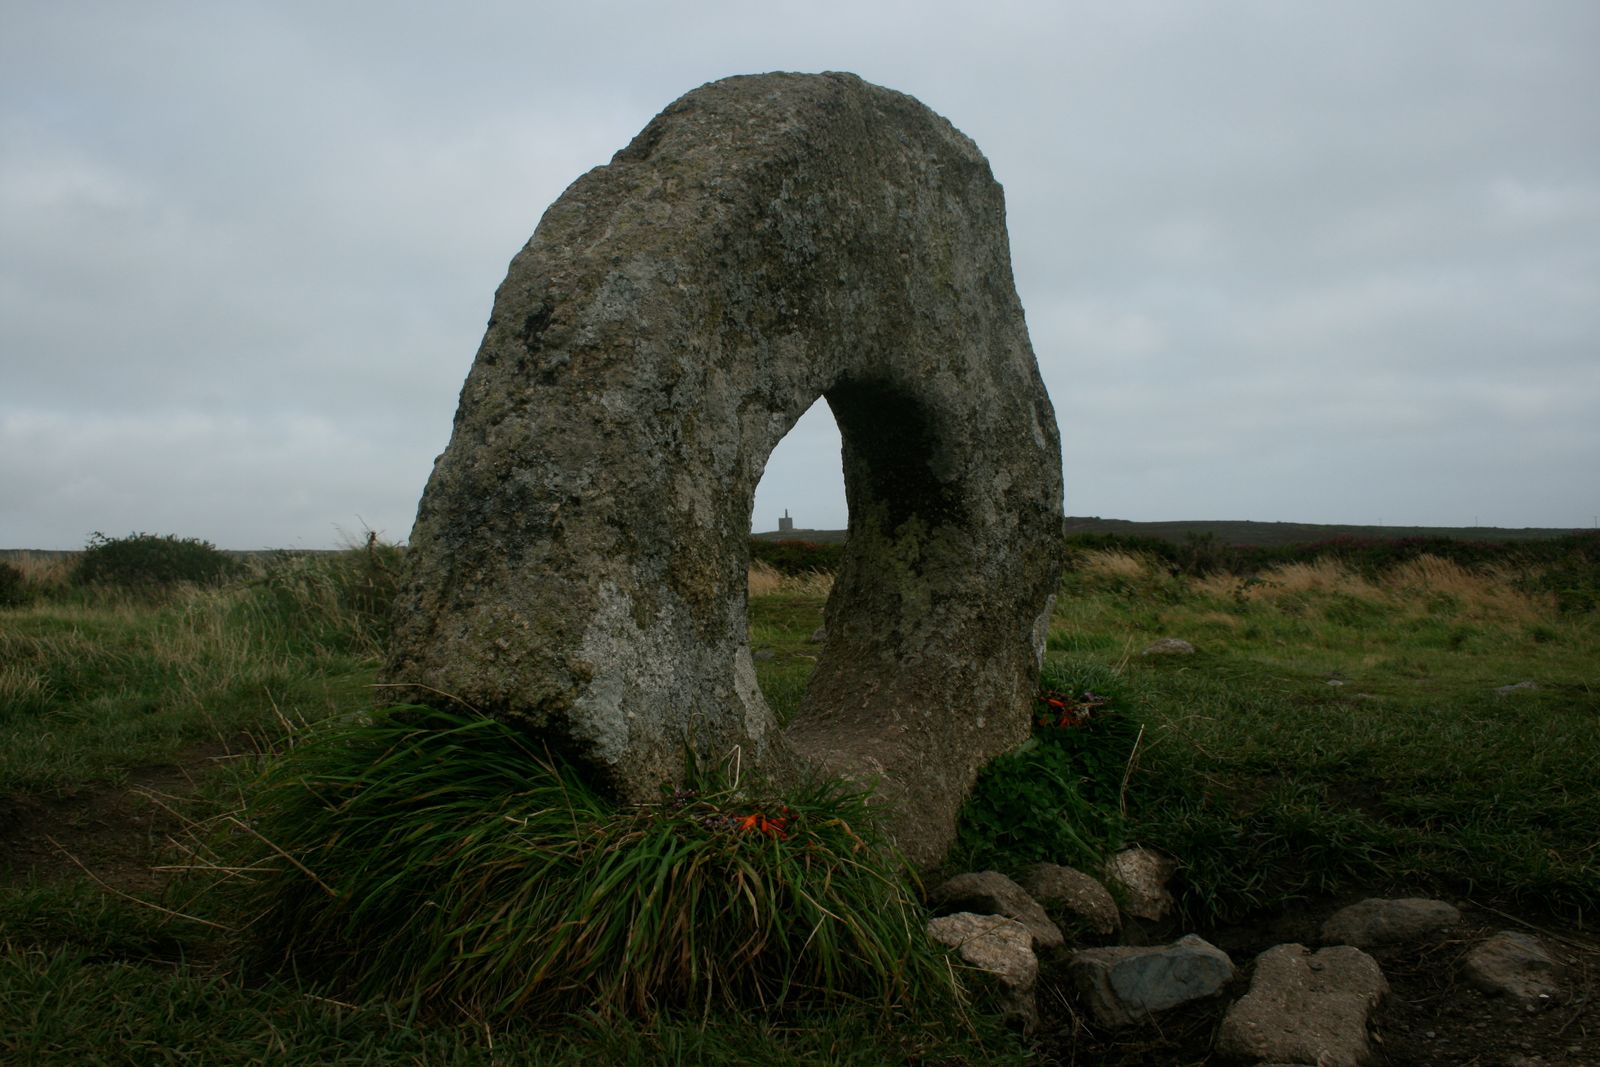 South Cornwall megaliths